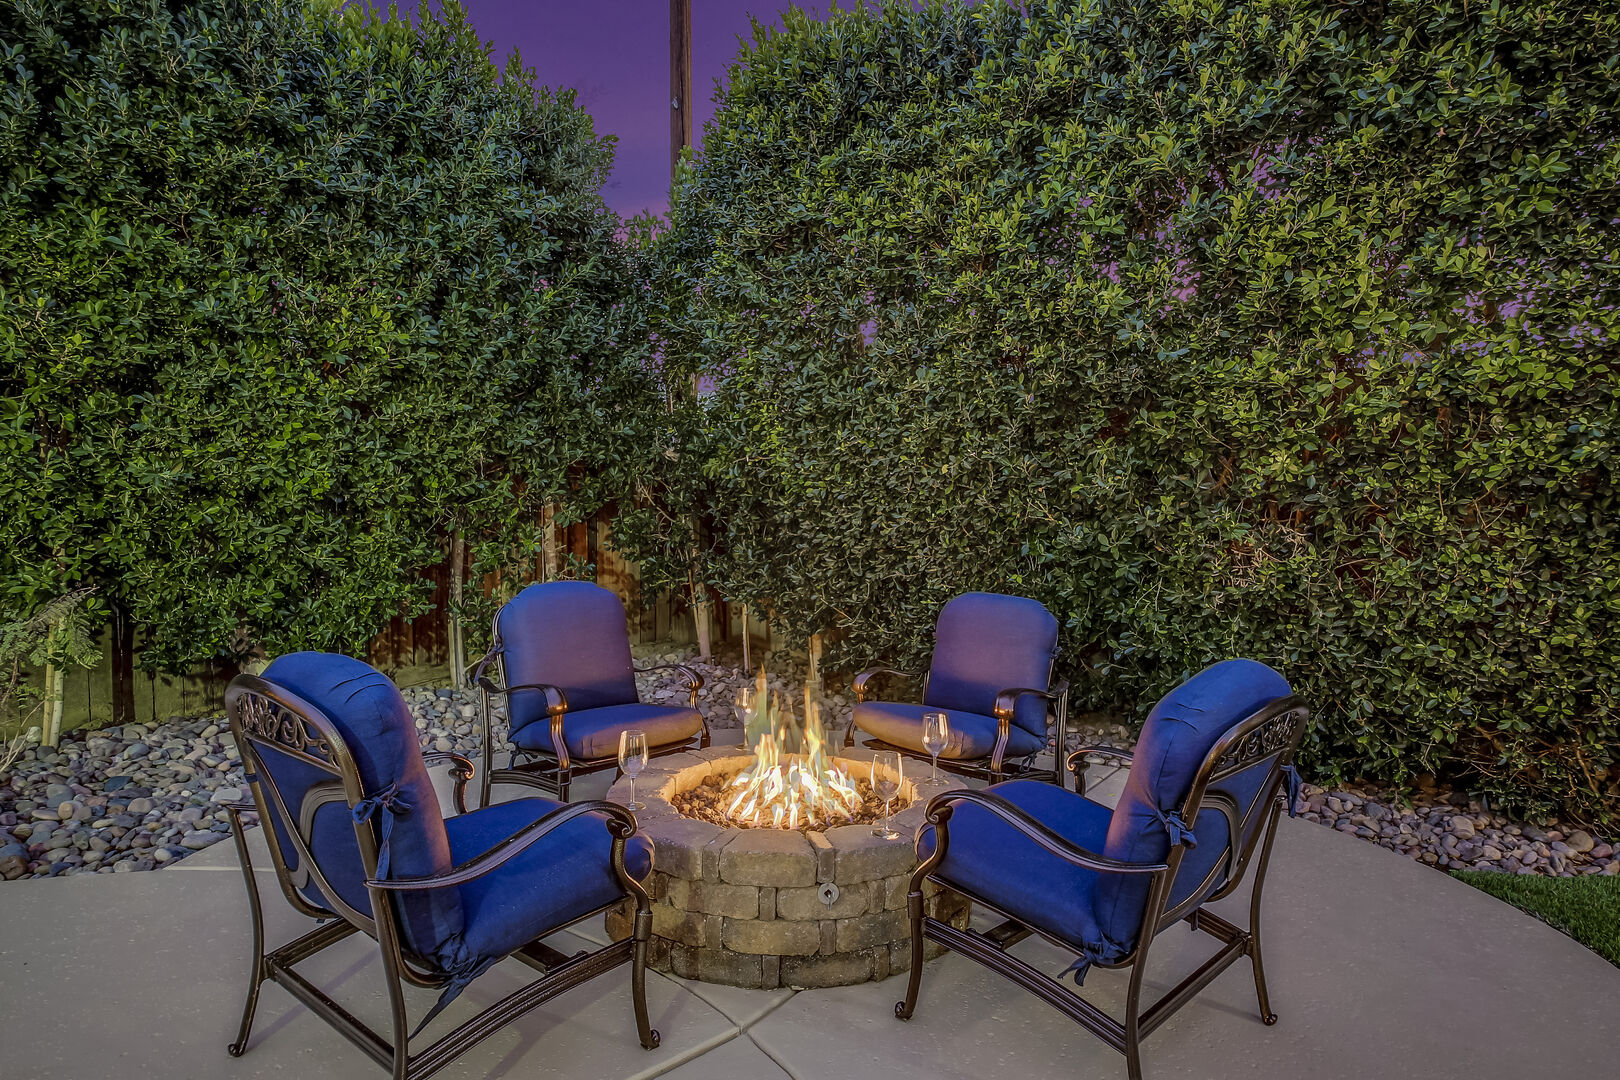 Sip on your favorite wine by the natural gas fire-pit with seating for four.